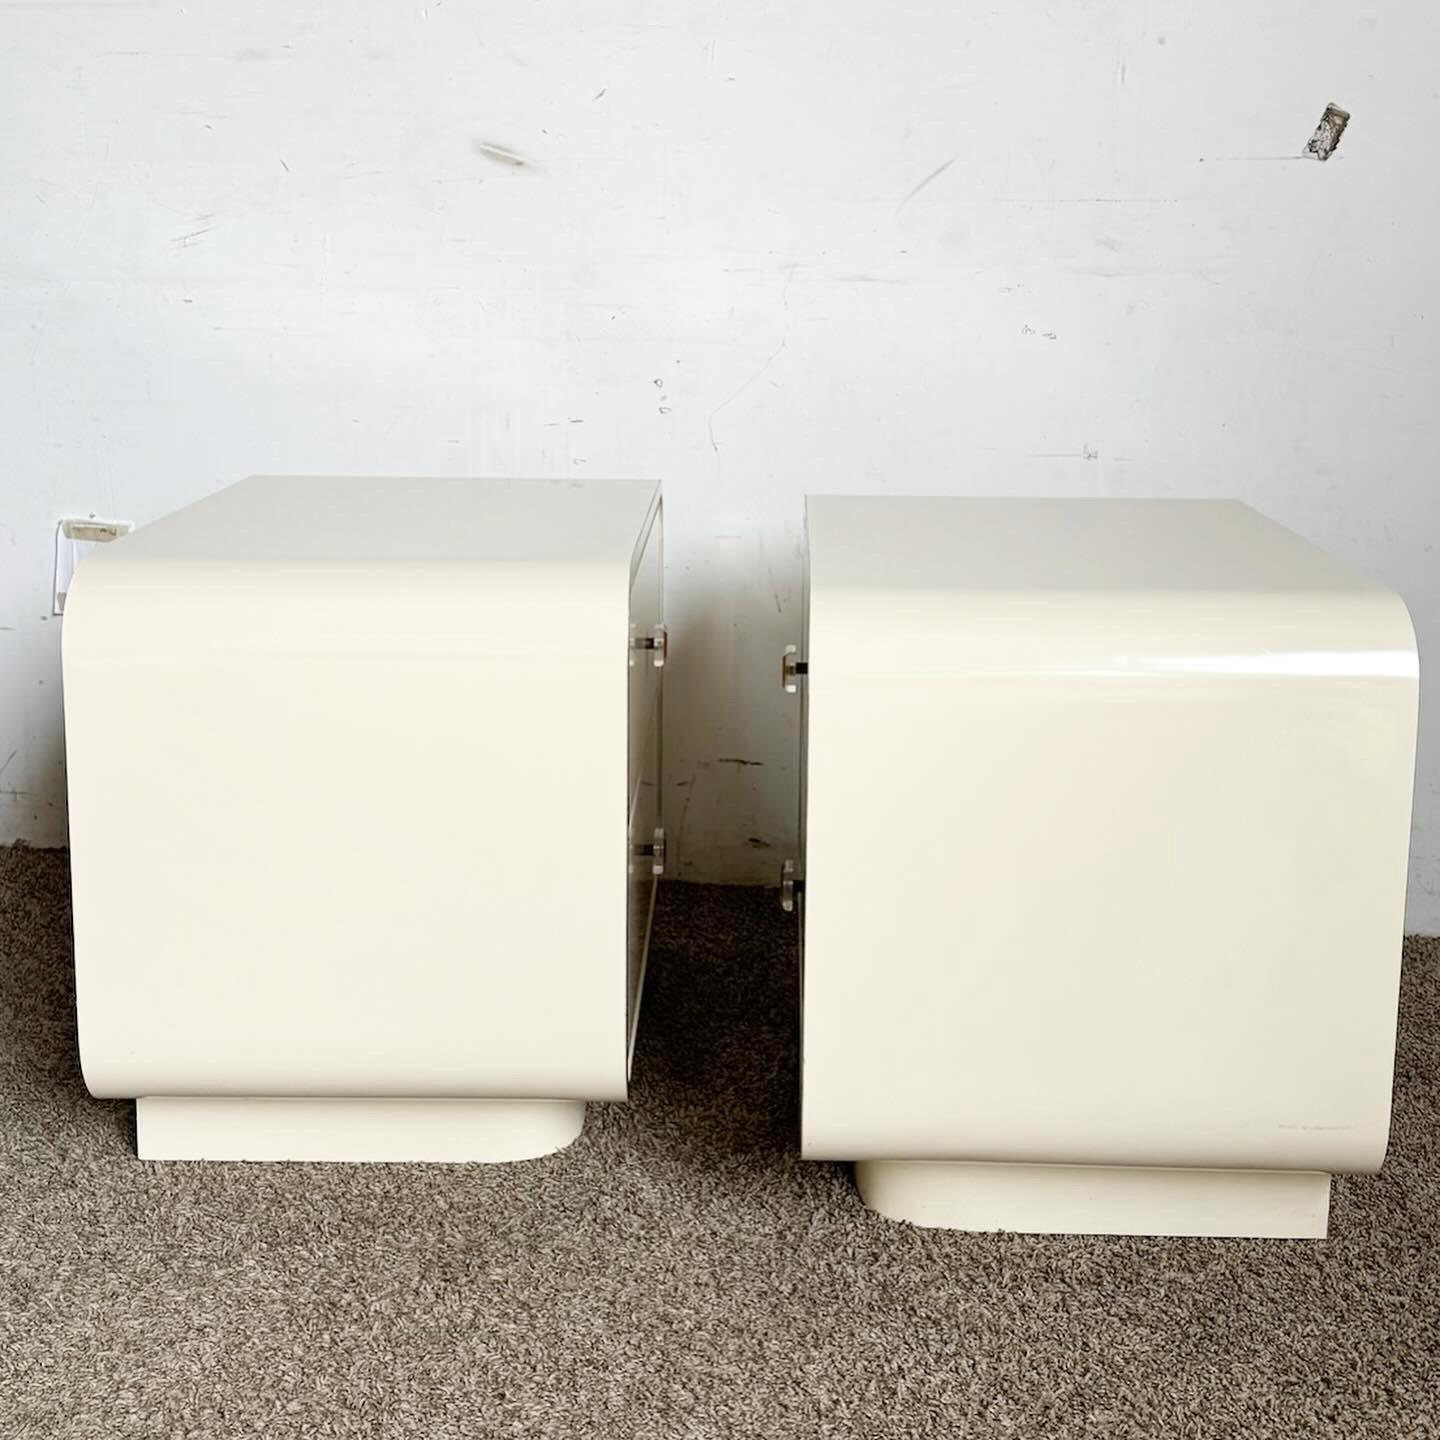 20th Century Postmodern Cream Lacquer Laminate Waterfall Nightstands With Gold Trim